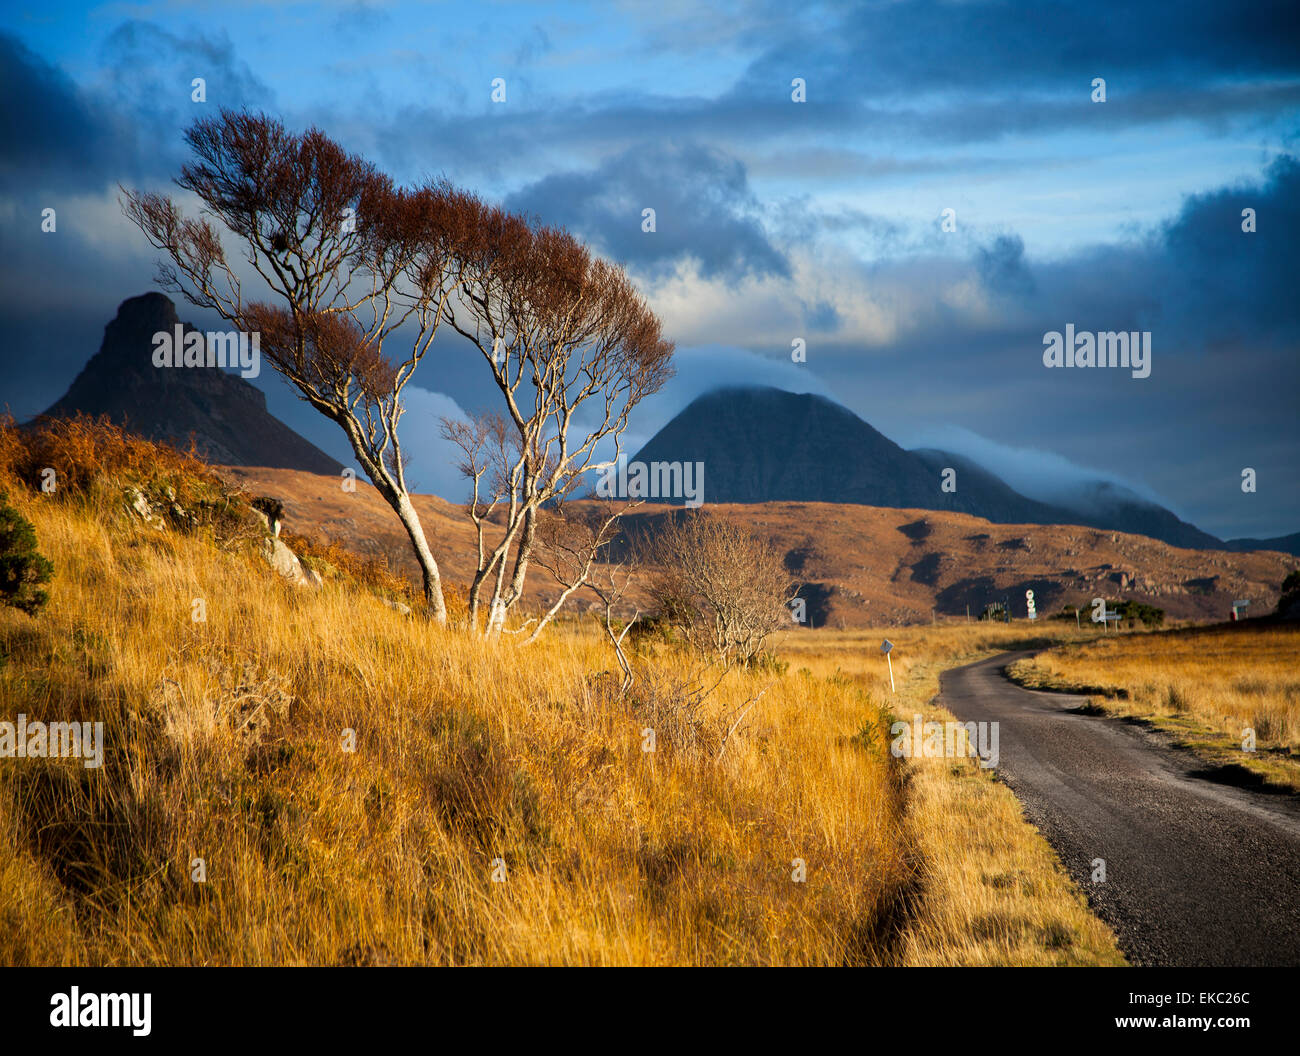 Storm clouds over rural road and mountains, Assynt, North West Highlands, Scotland, UK Stock Photo